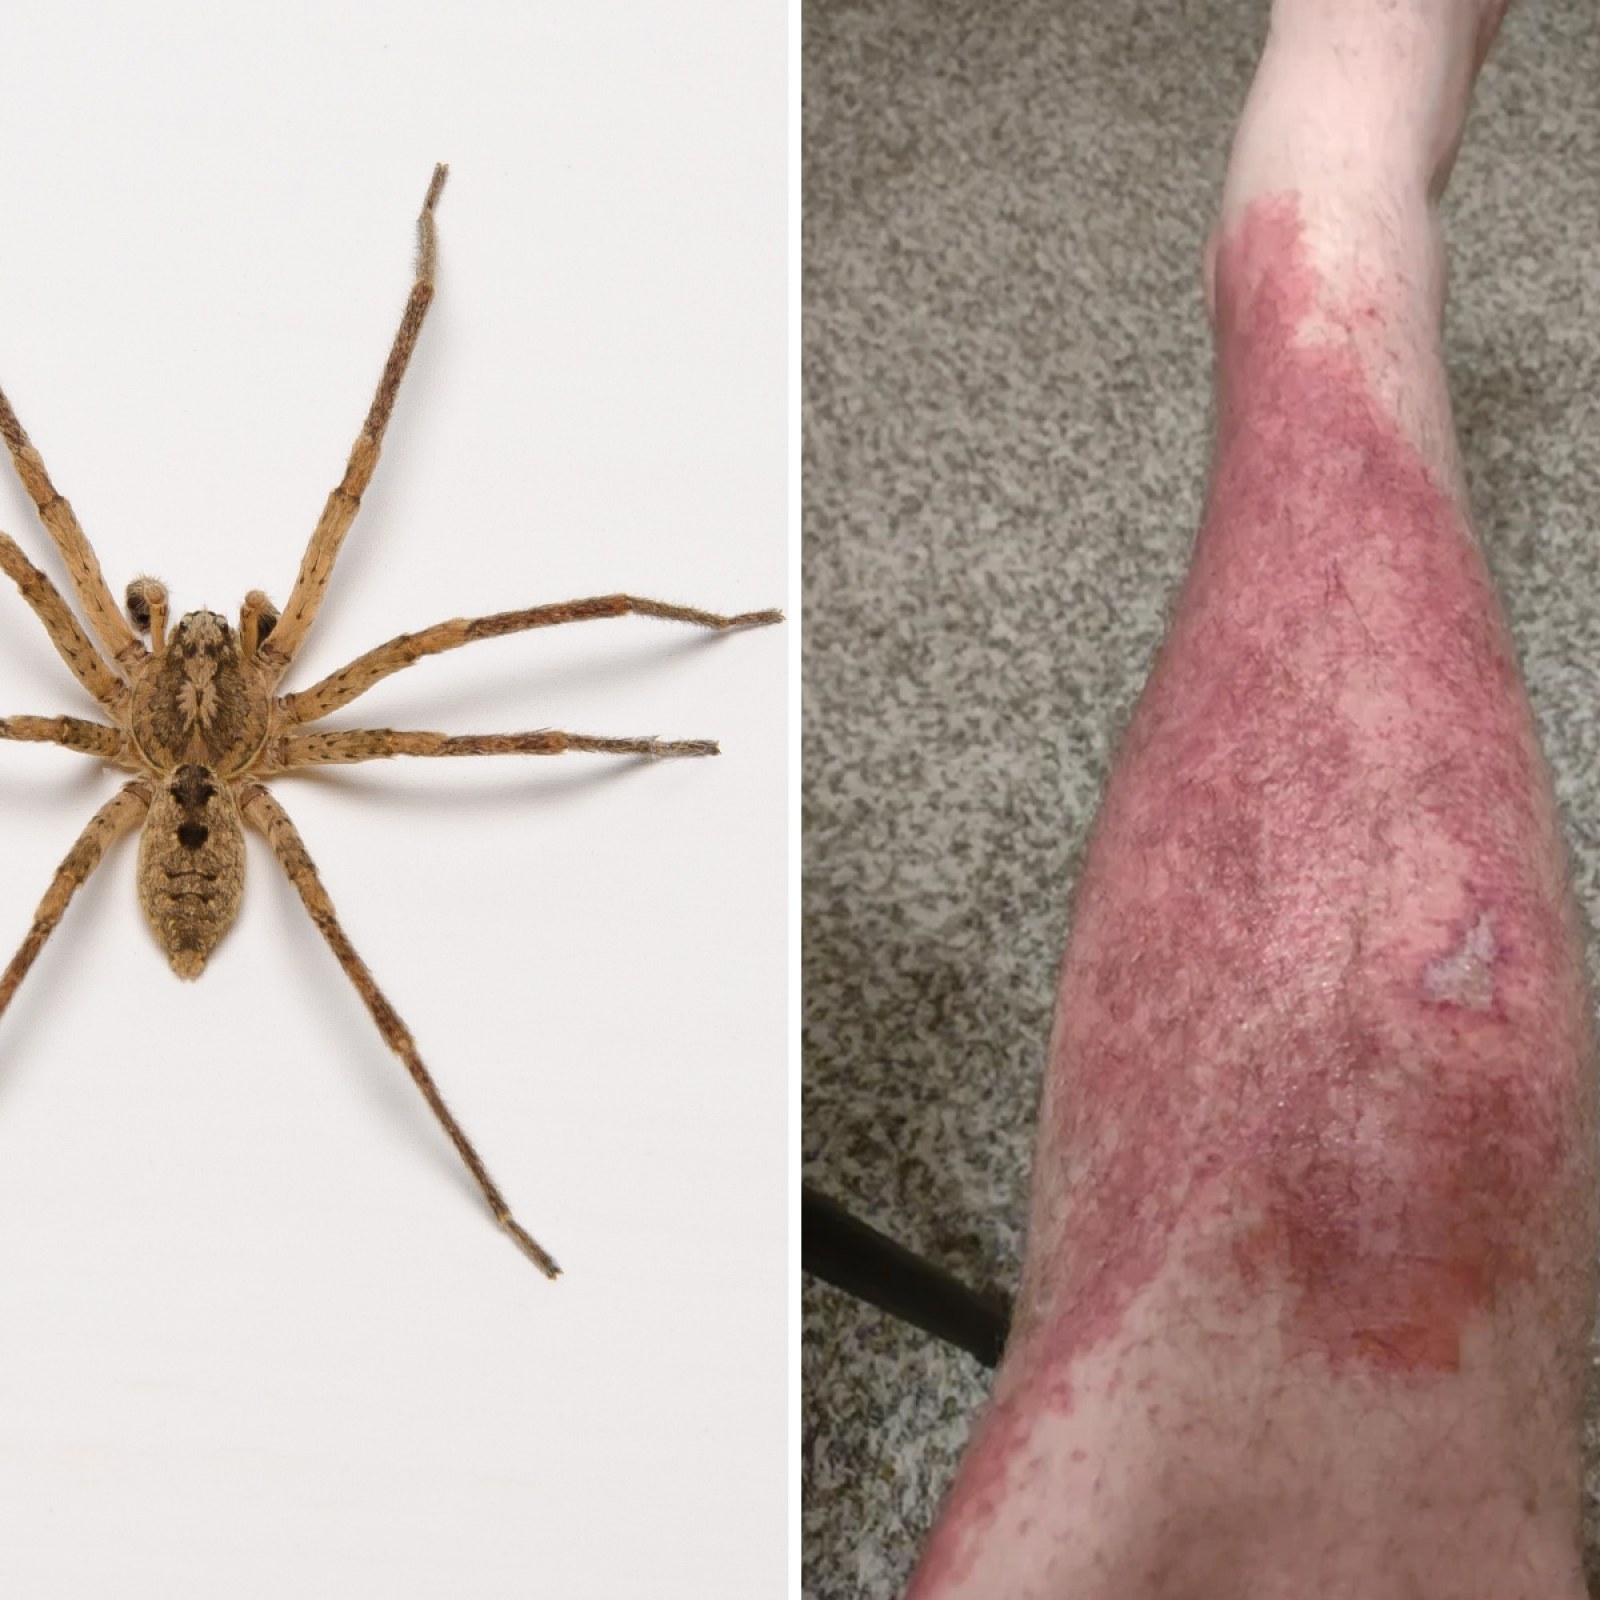 Spider Bite Symptoms: What Does a Spider Bite Look and Feel Like?